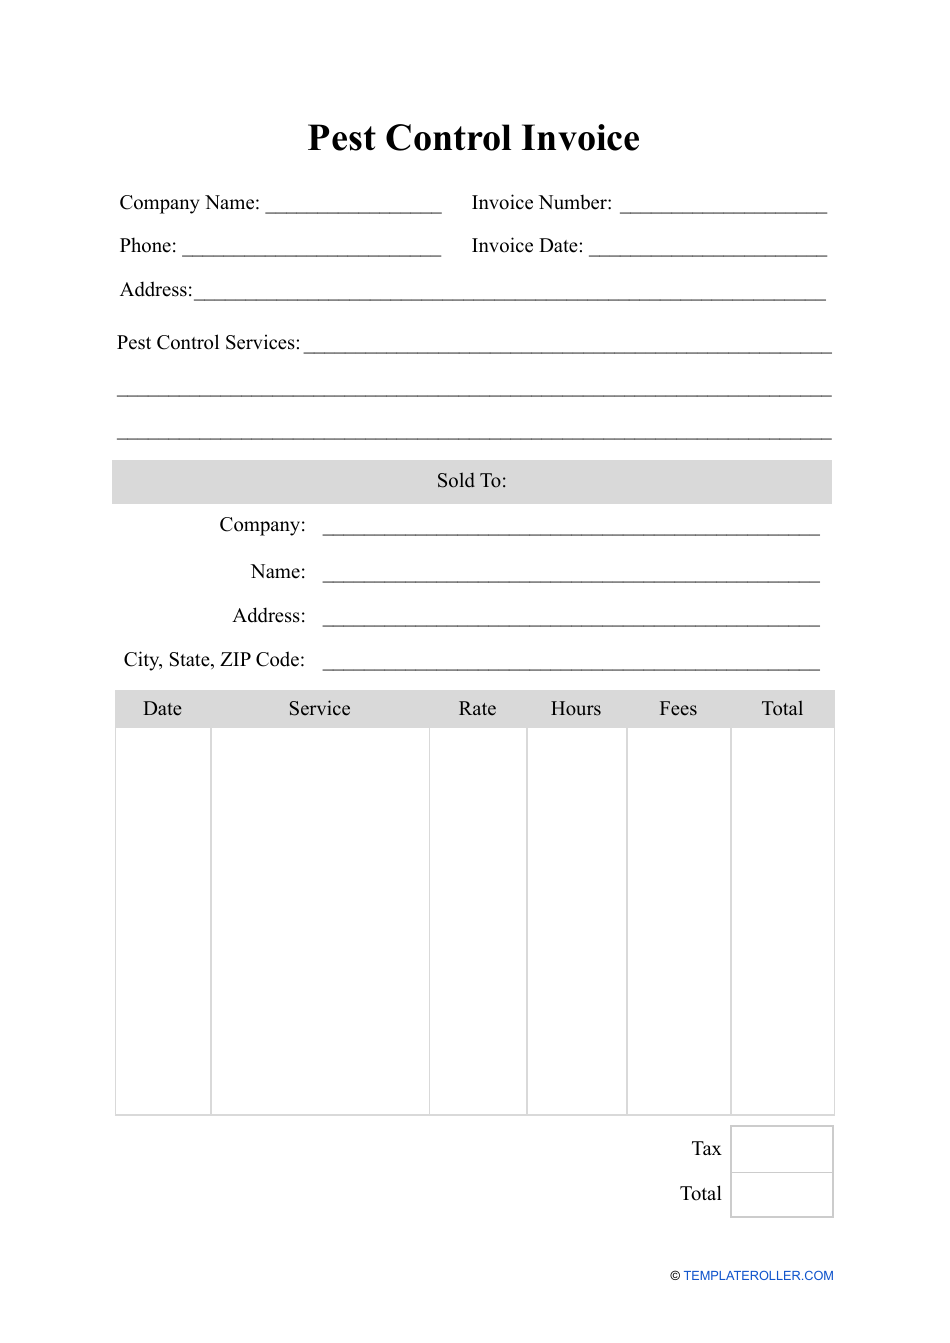 Pest Control Invoice Template Fill Out Sign Online and Download PDF